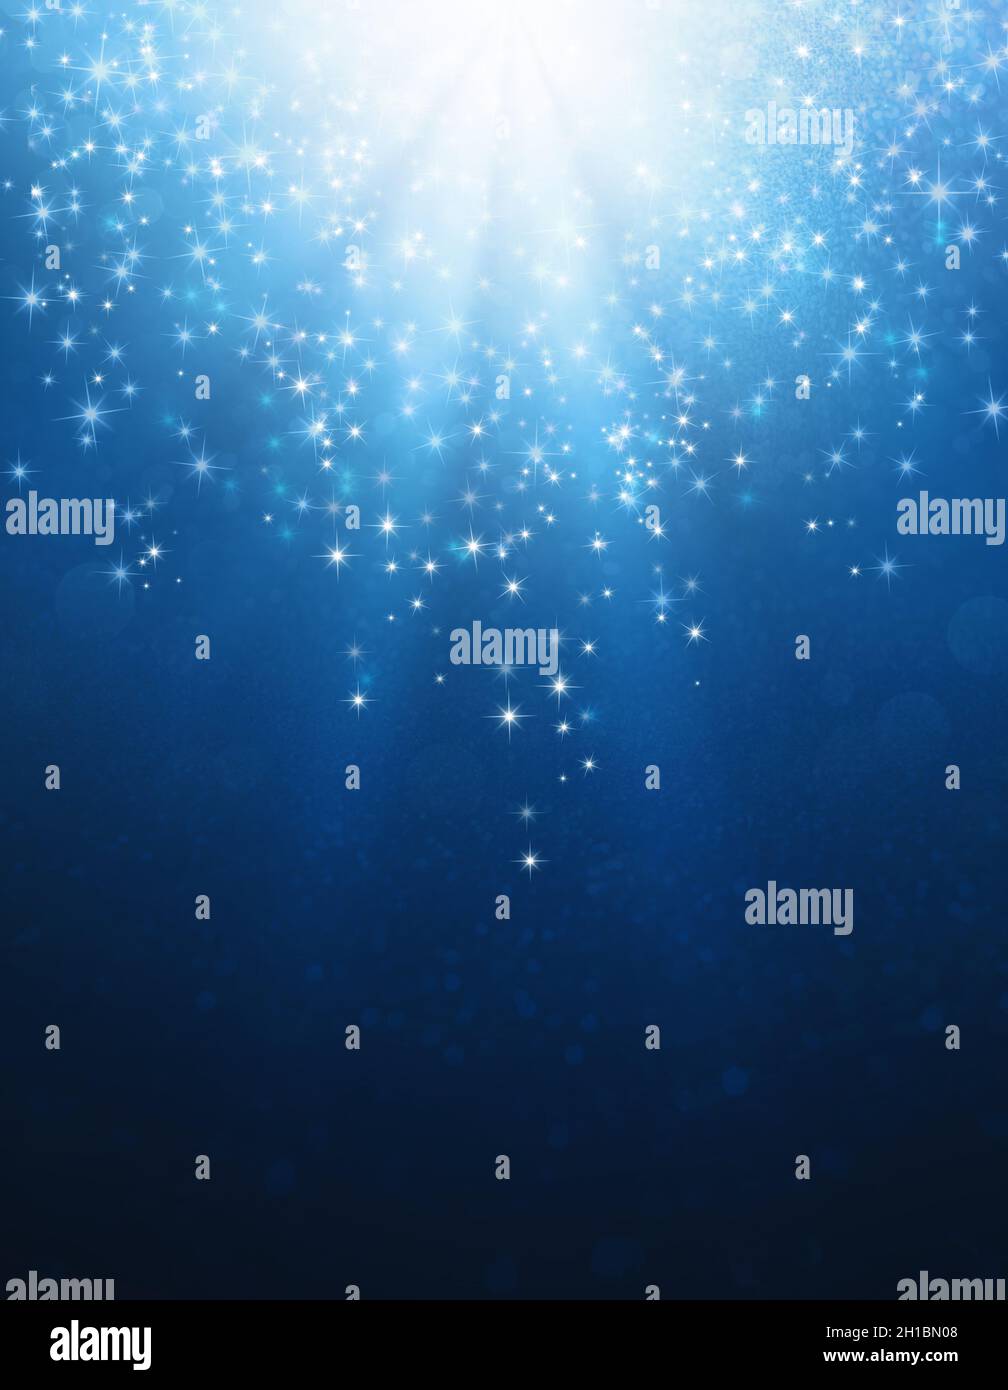 Glittering festive blue background for Christmas celebrations, new year, success, anniversary Stock Photo